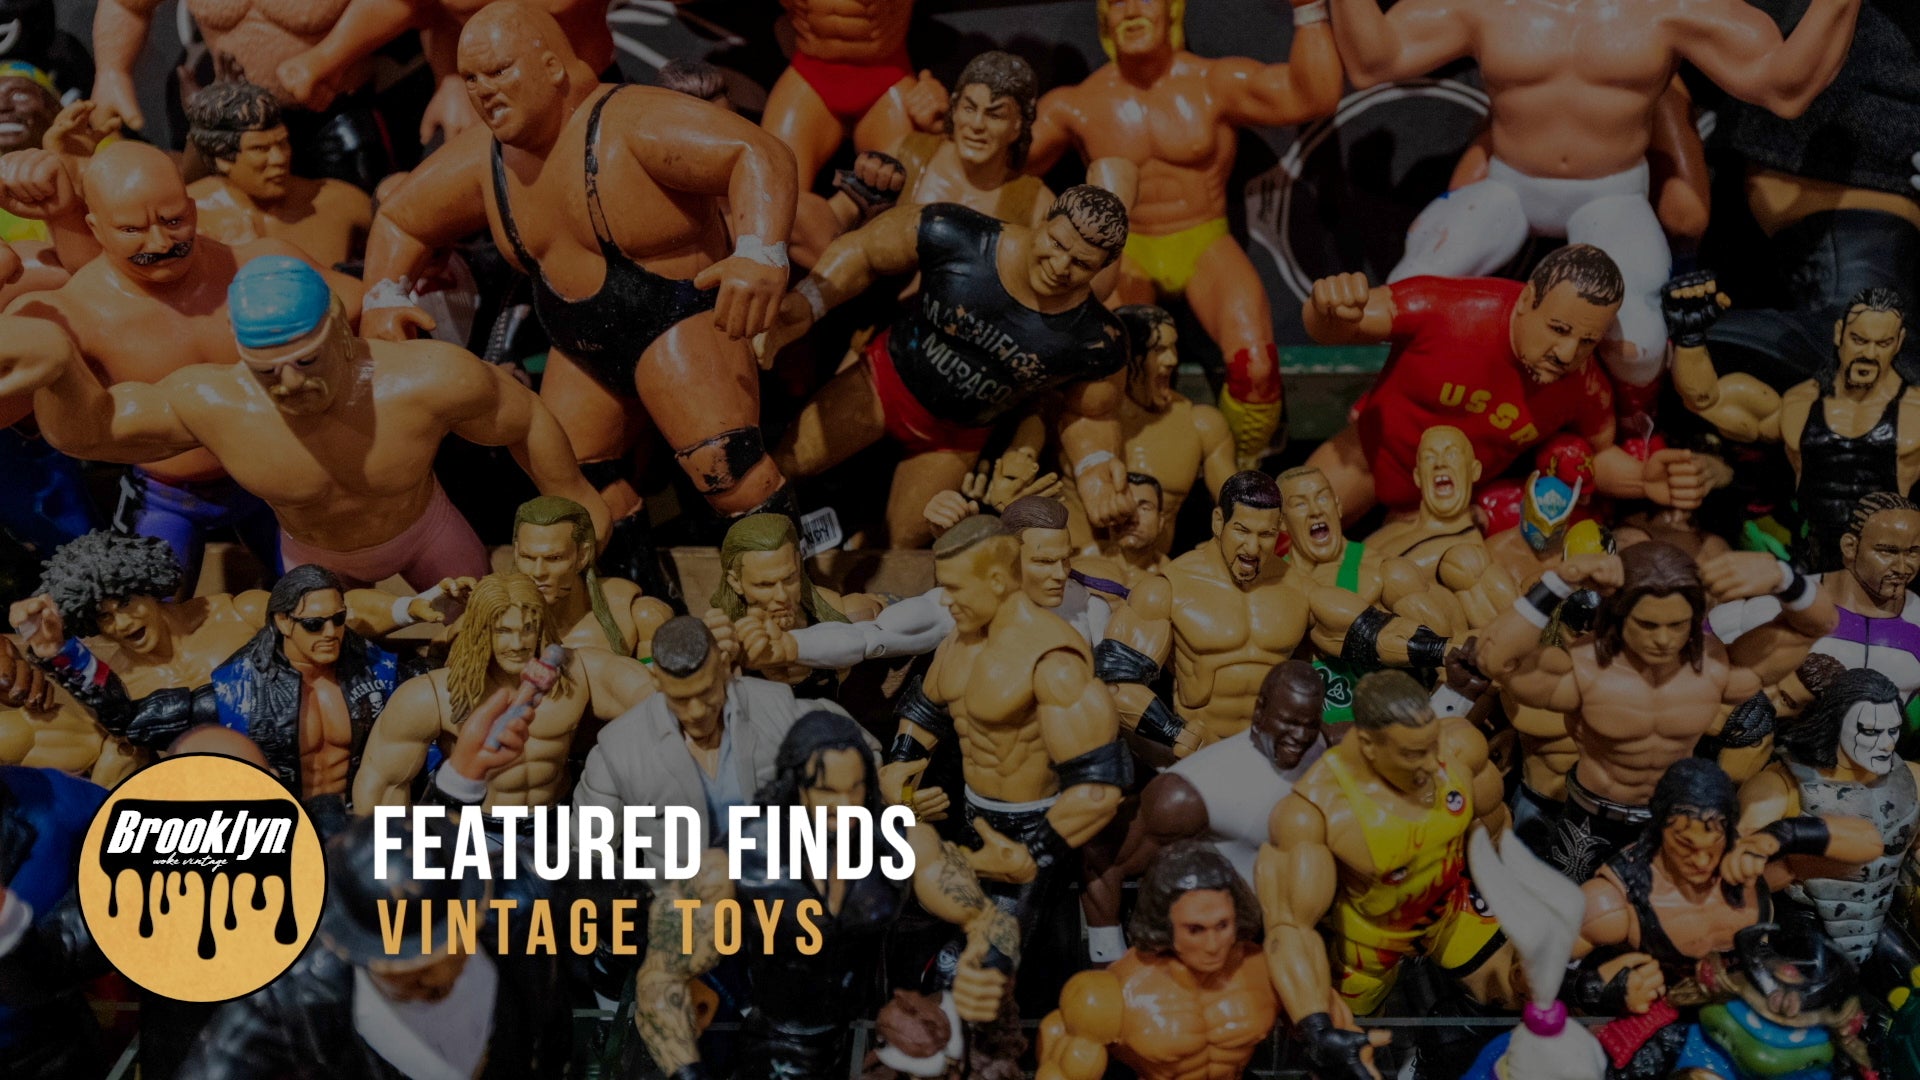 "Featured Finds” Vintage Toys